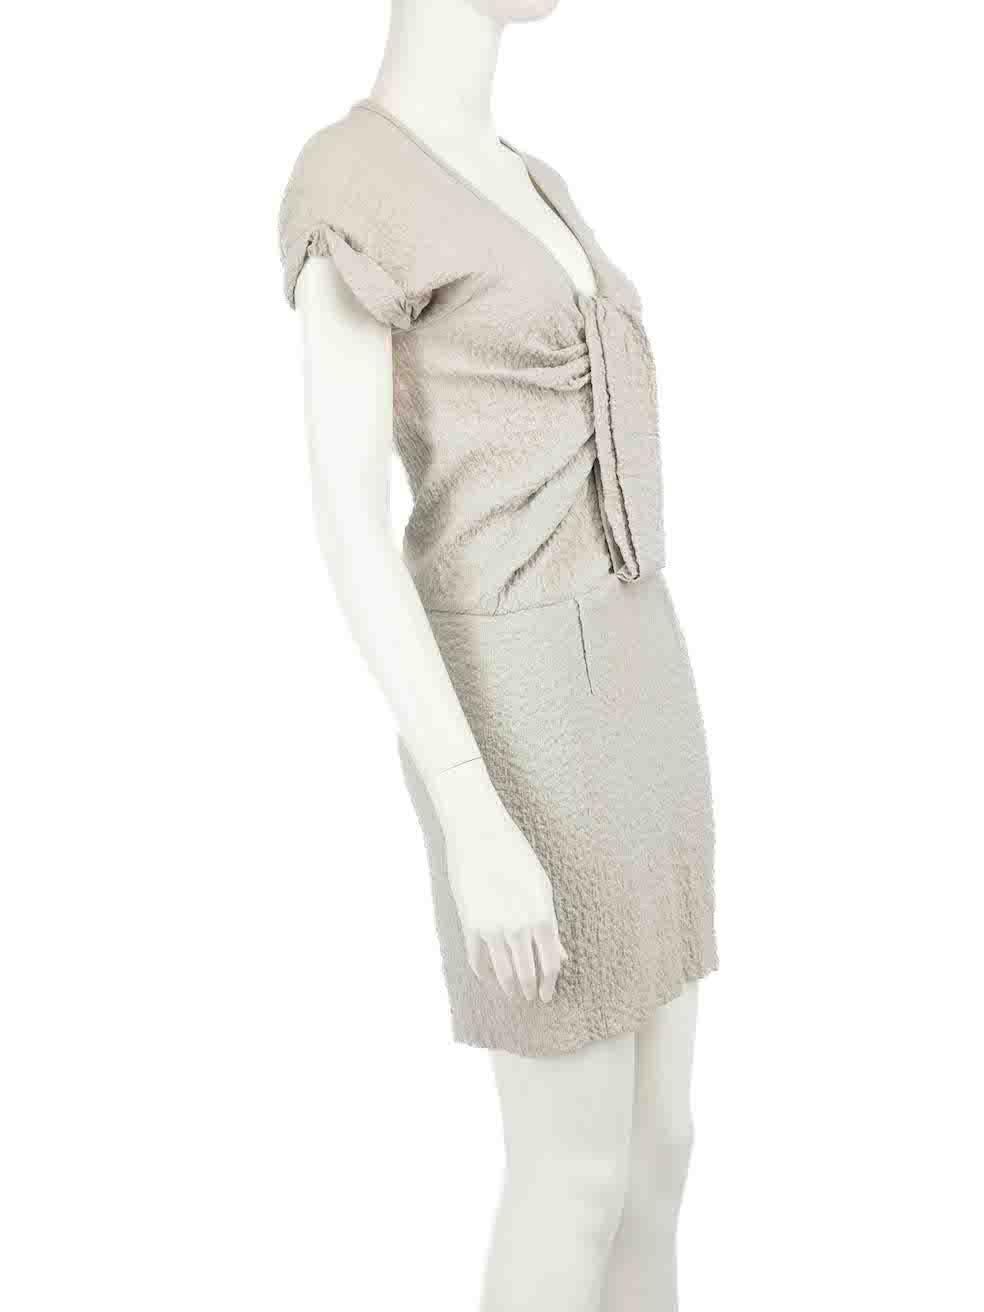 CONDITION is Good. Minor wear to dress is evident. Light wear to the stitching at the centre front and under the arms where some stray thread ends can be seen on this used Isabel Marant designer resale item.
 
 
 
 Details
 
 
 Grey
 
 Viscose
 
